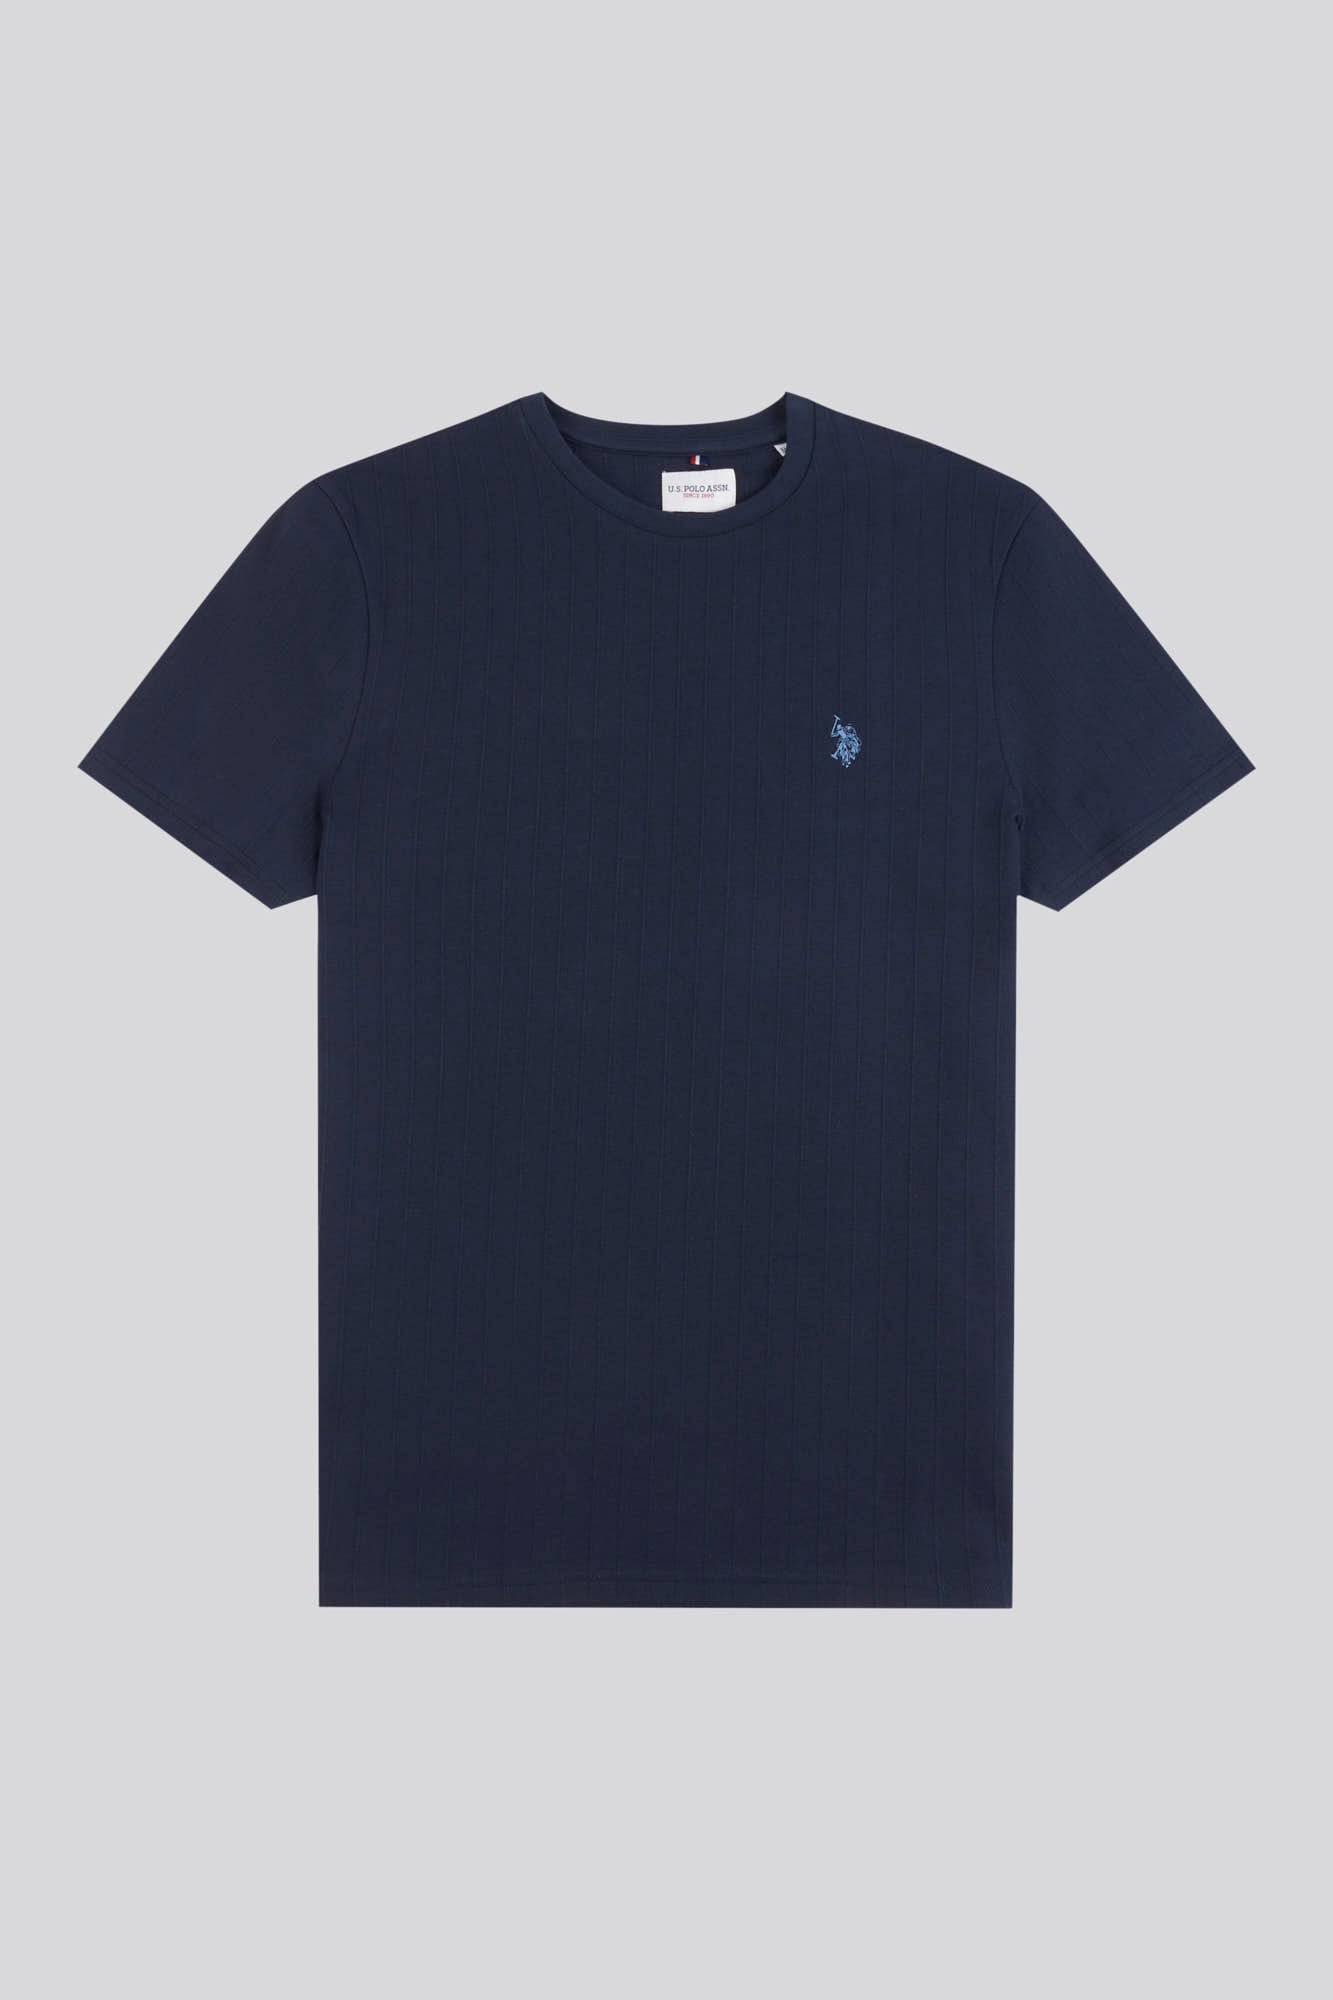 Mens Classic Fit Verticle Texture T-Shirt in Dark Sapphire Navy